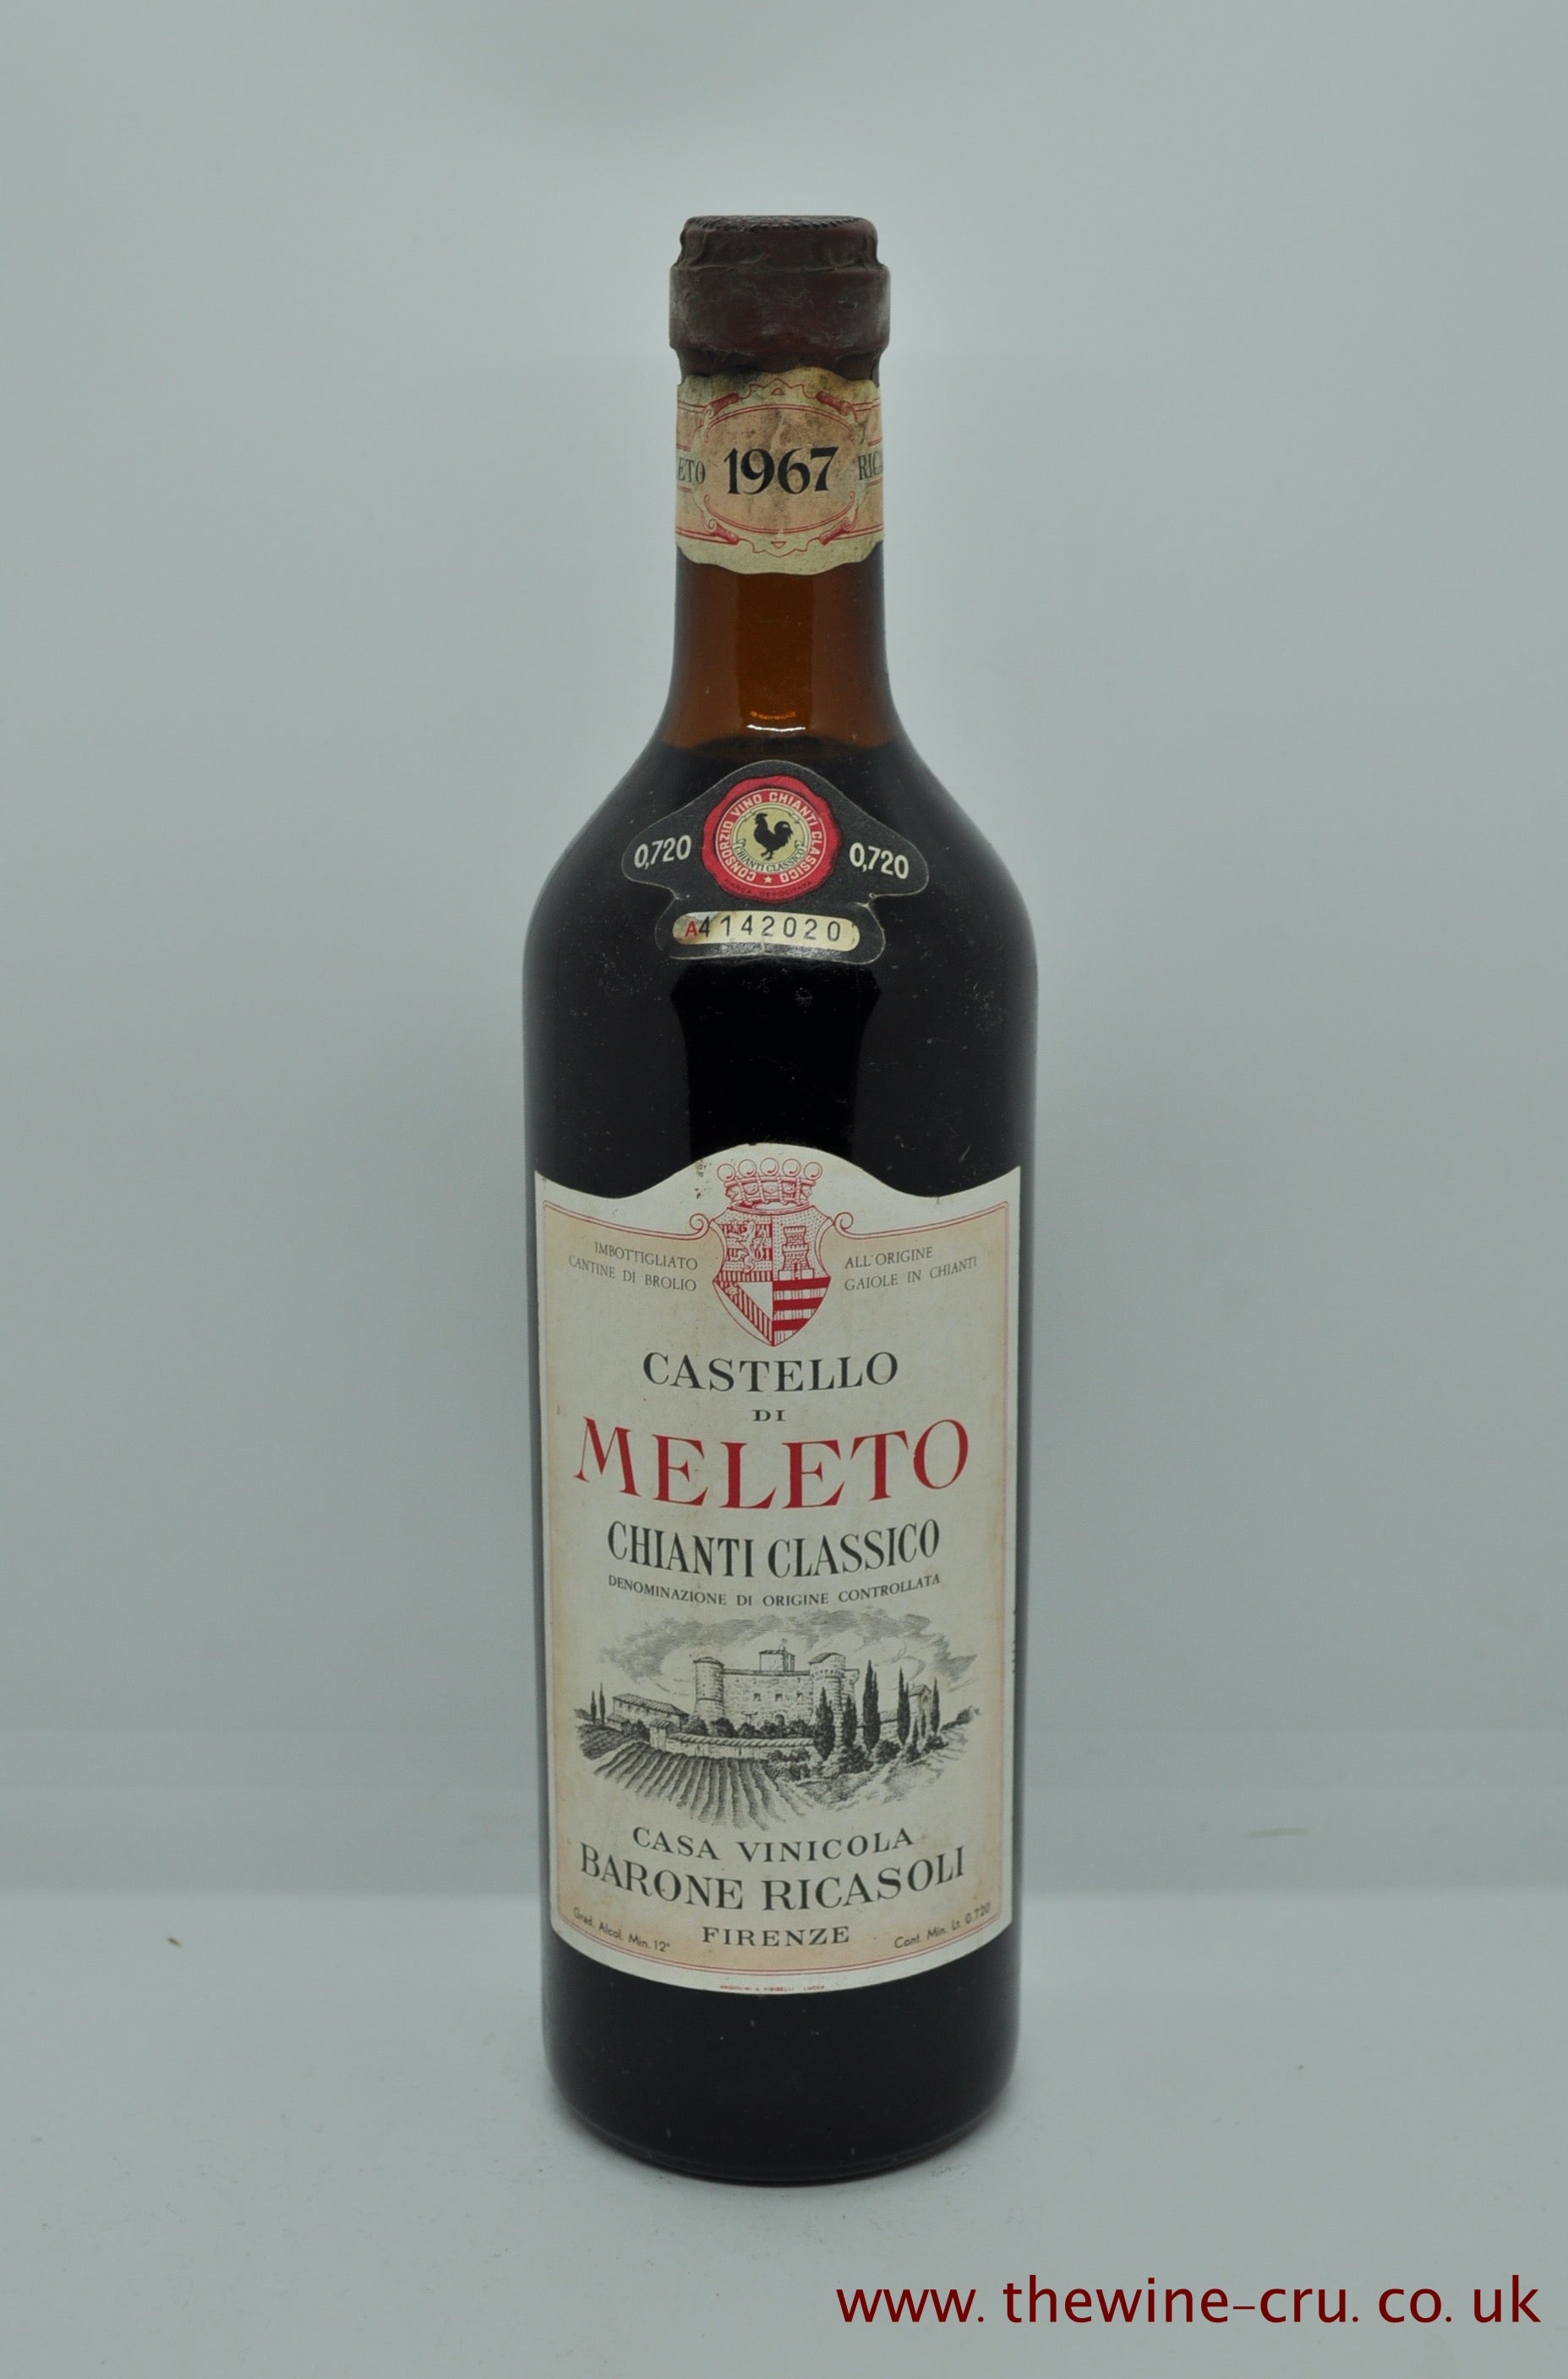 A bottle of 1967 vintage red wine. Castello Di Meleto, Chianti Classico, Barone Ricasoli. Italy. The bottle is in good condition with the wine level being top shoulder. Immediate delivery. Free local delivery. Gift wrapping available.